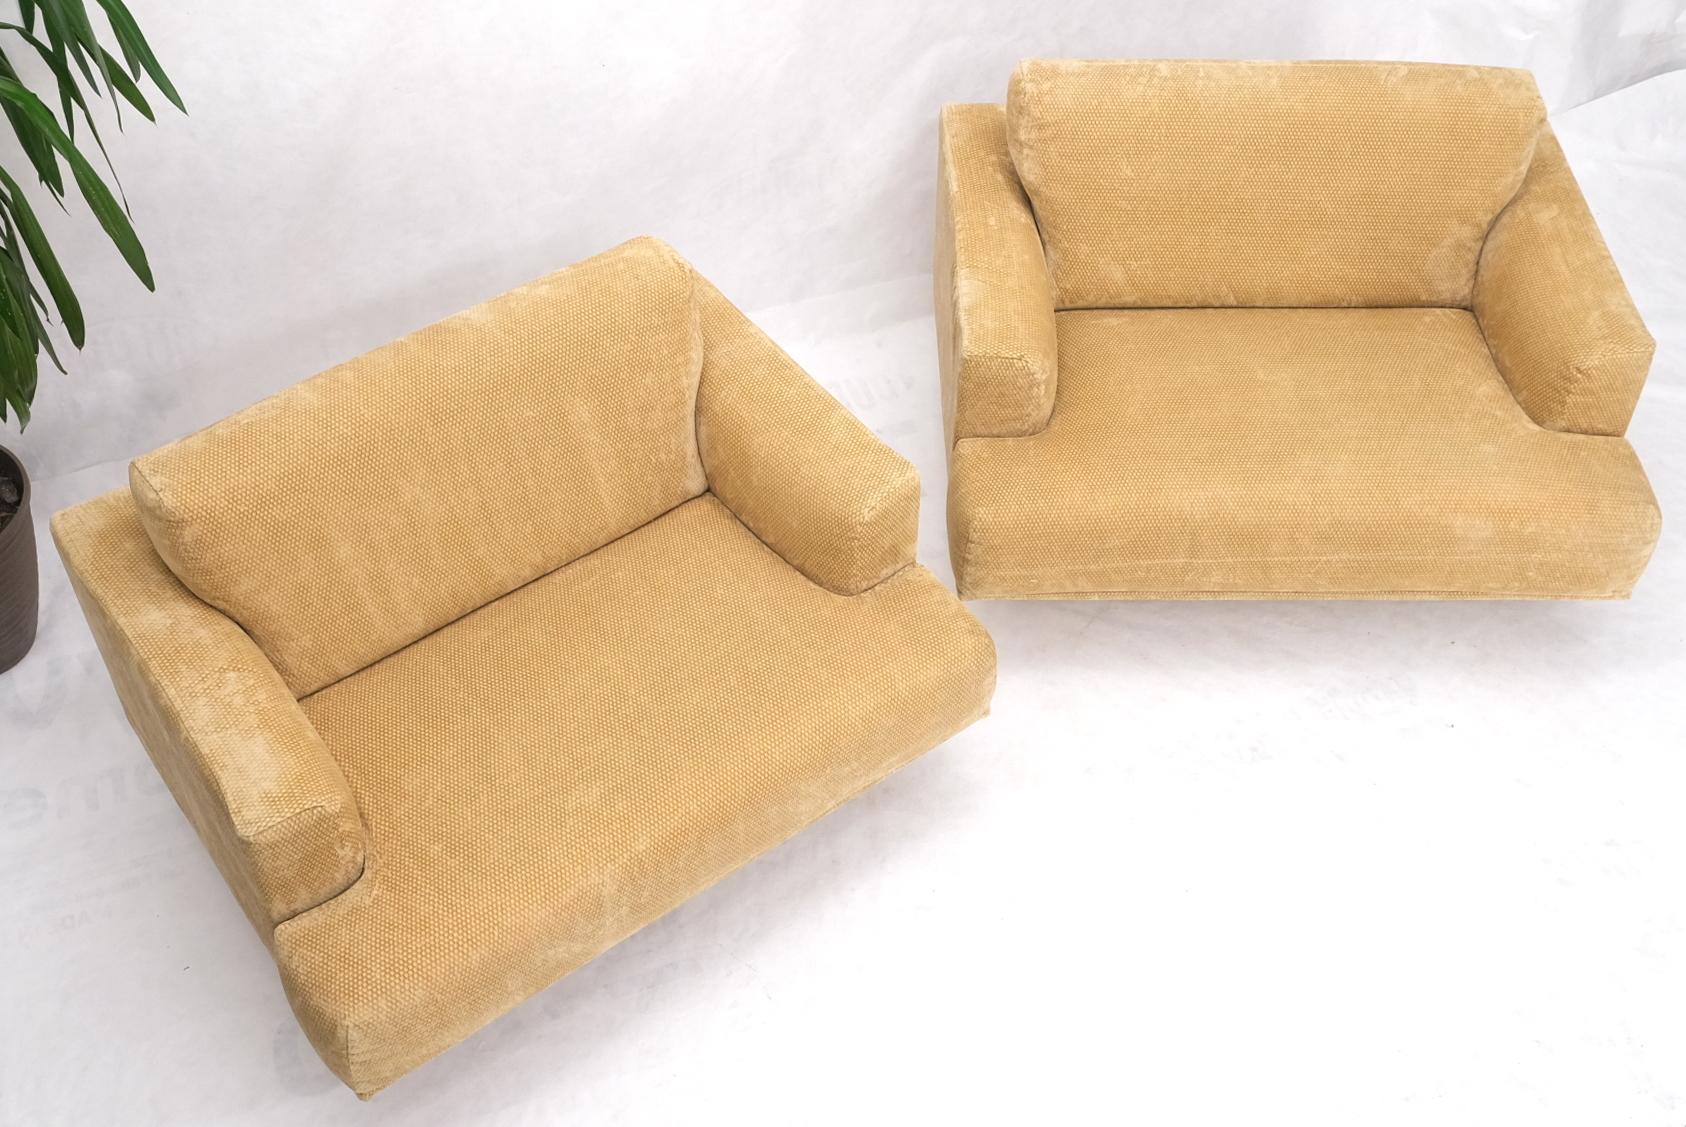 Pair of Wide Seat Almost Sattee Width Lounge Chairs by Cassina In Good Condition For Sale In Rockaway, NJ